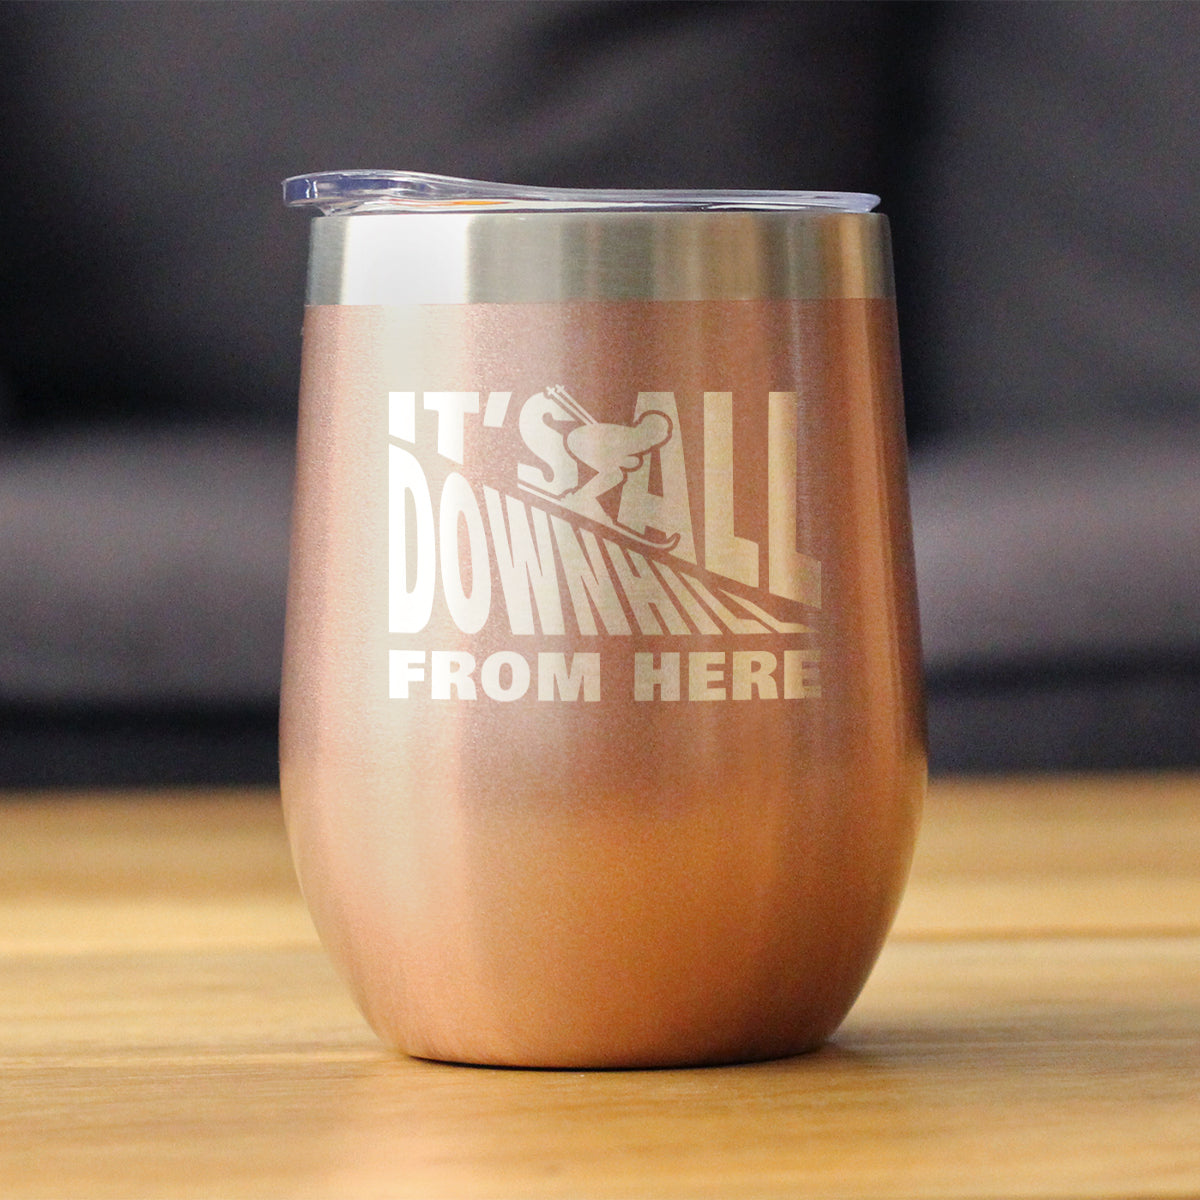 Downhill From Here - Wine Tumbler Glass with Sliding Lid - Stainless Steel Travel Mug - Fun Skiing Gifts and Decor for Skiers